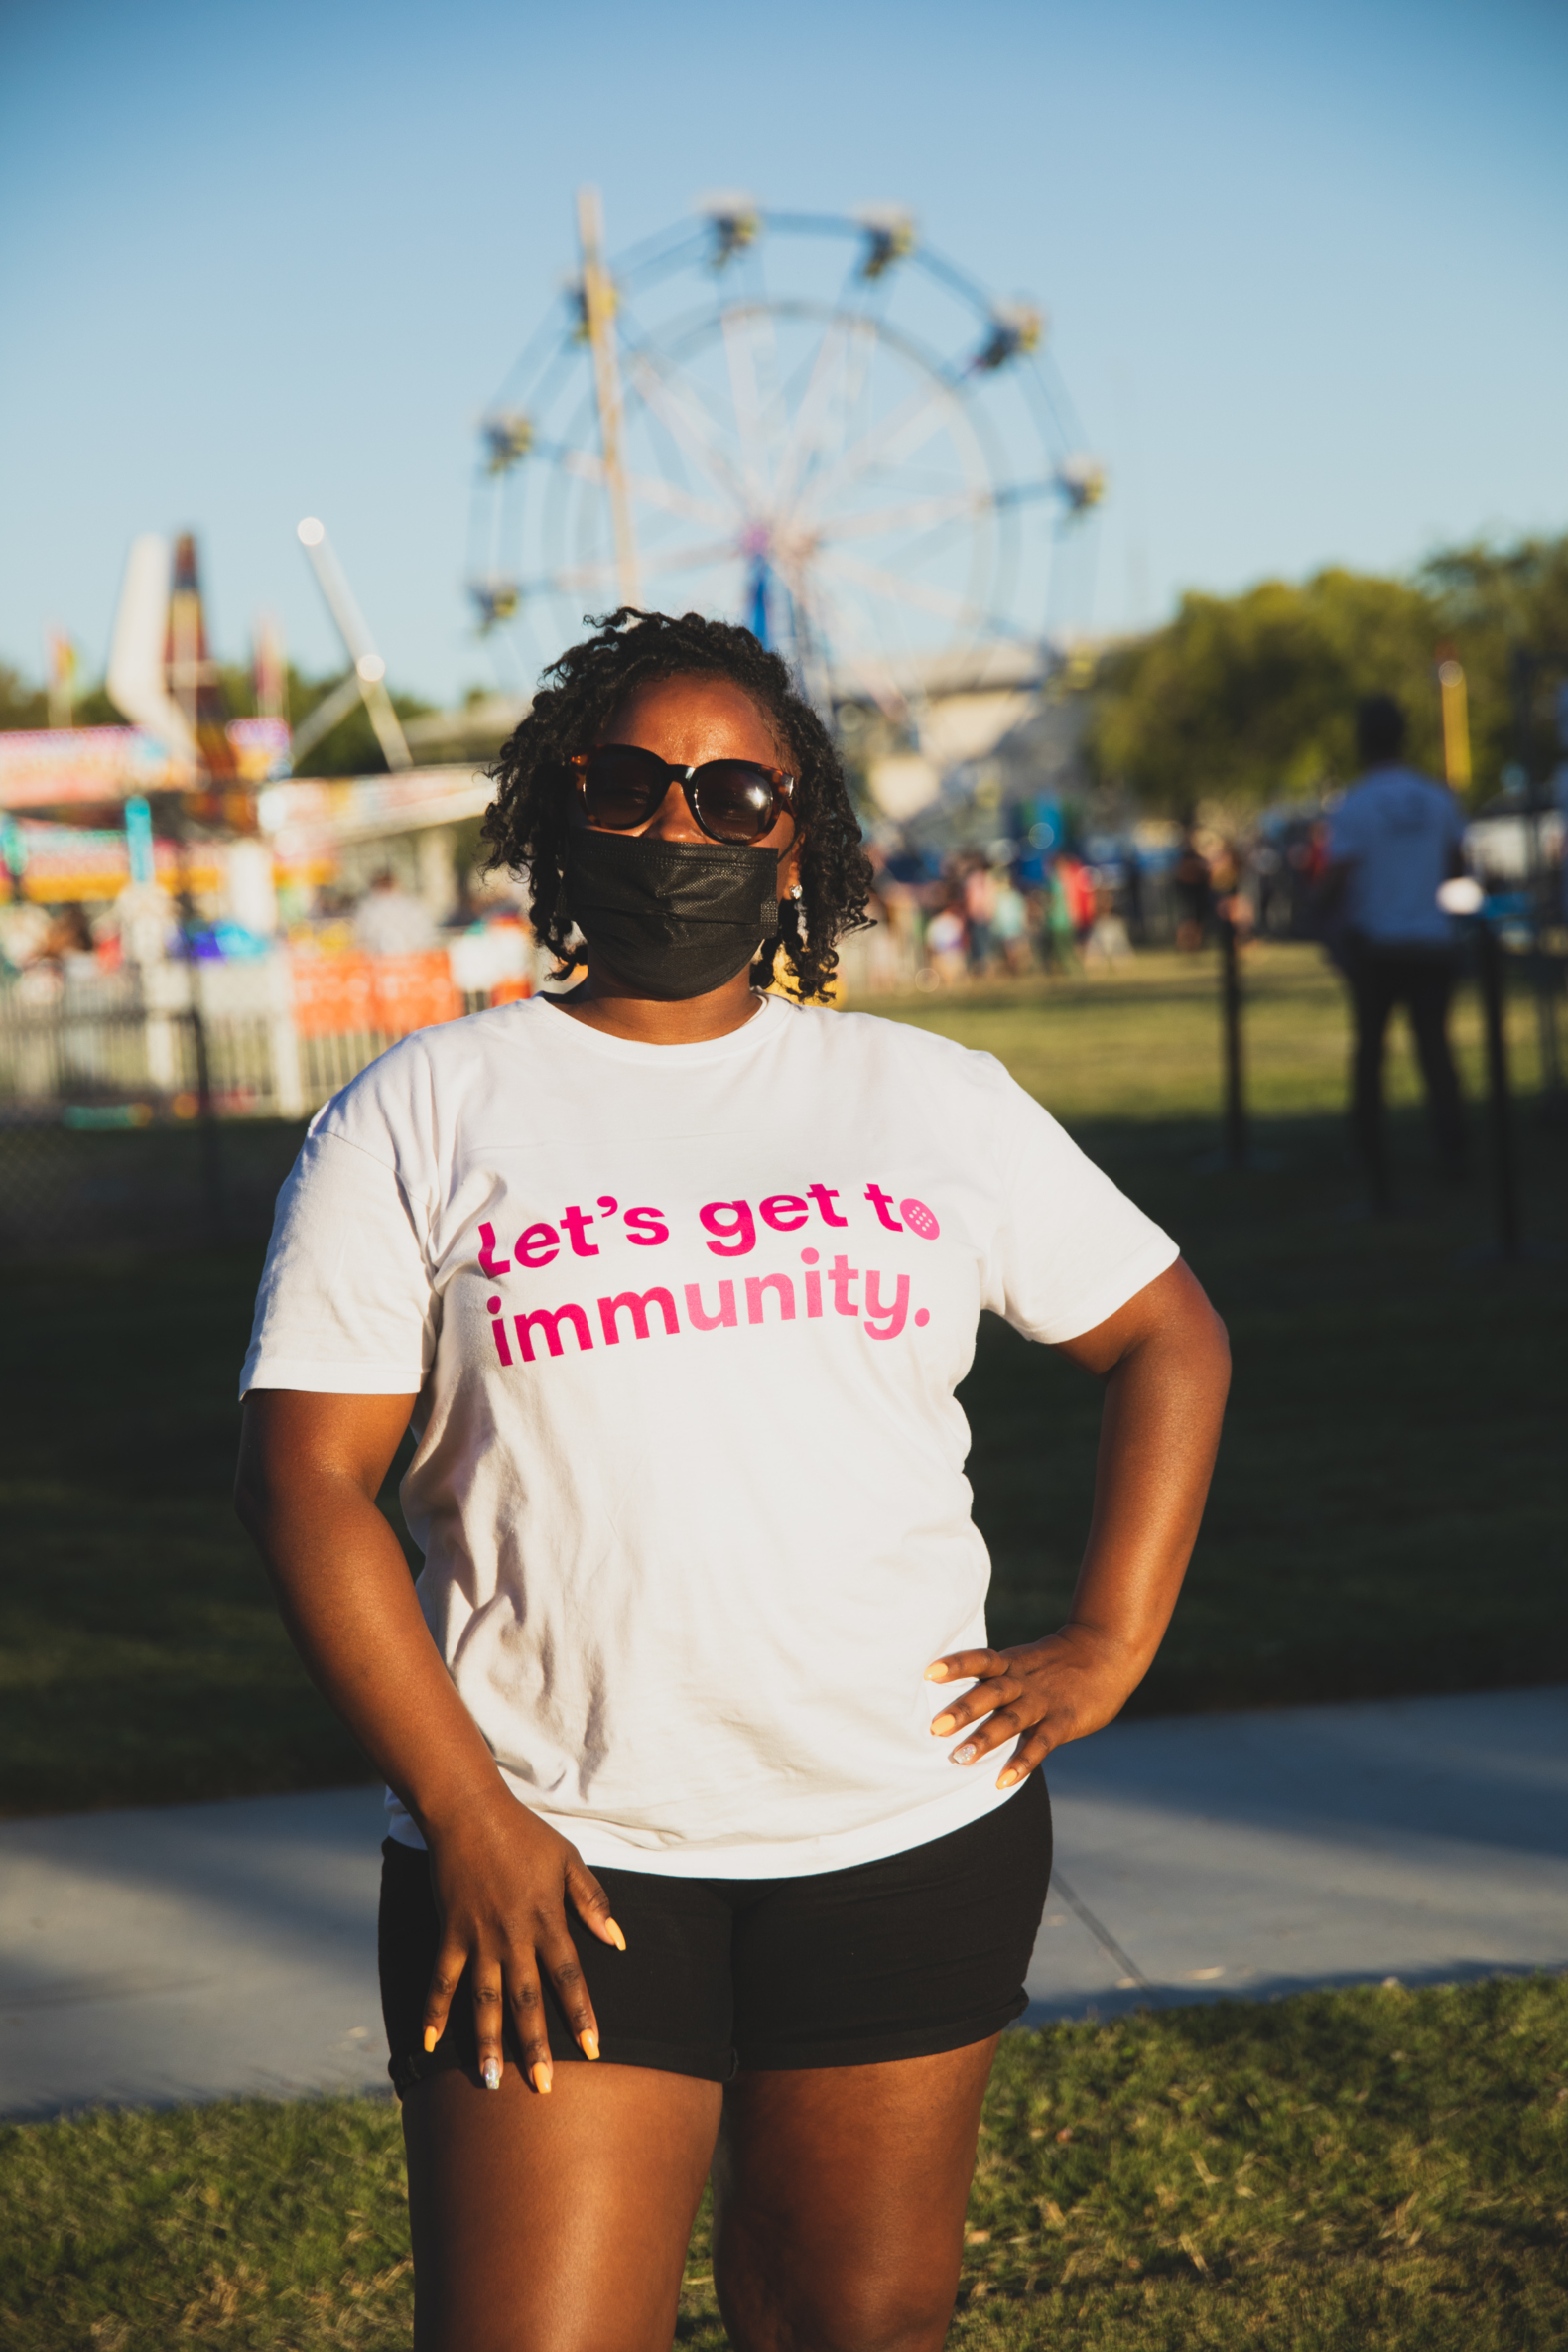 Person wearing mask and shirt that reads "Let's get to immunity" stands proudly with hand on their hip in front of a carnival.